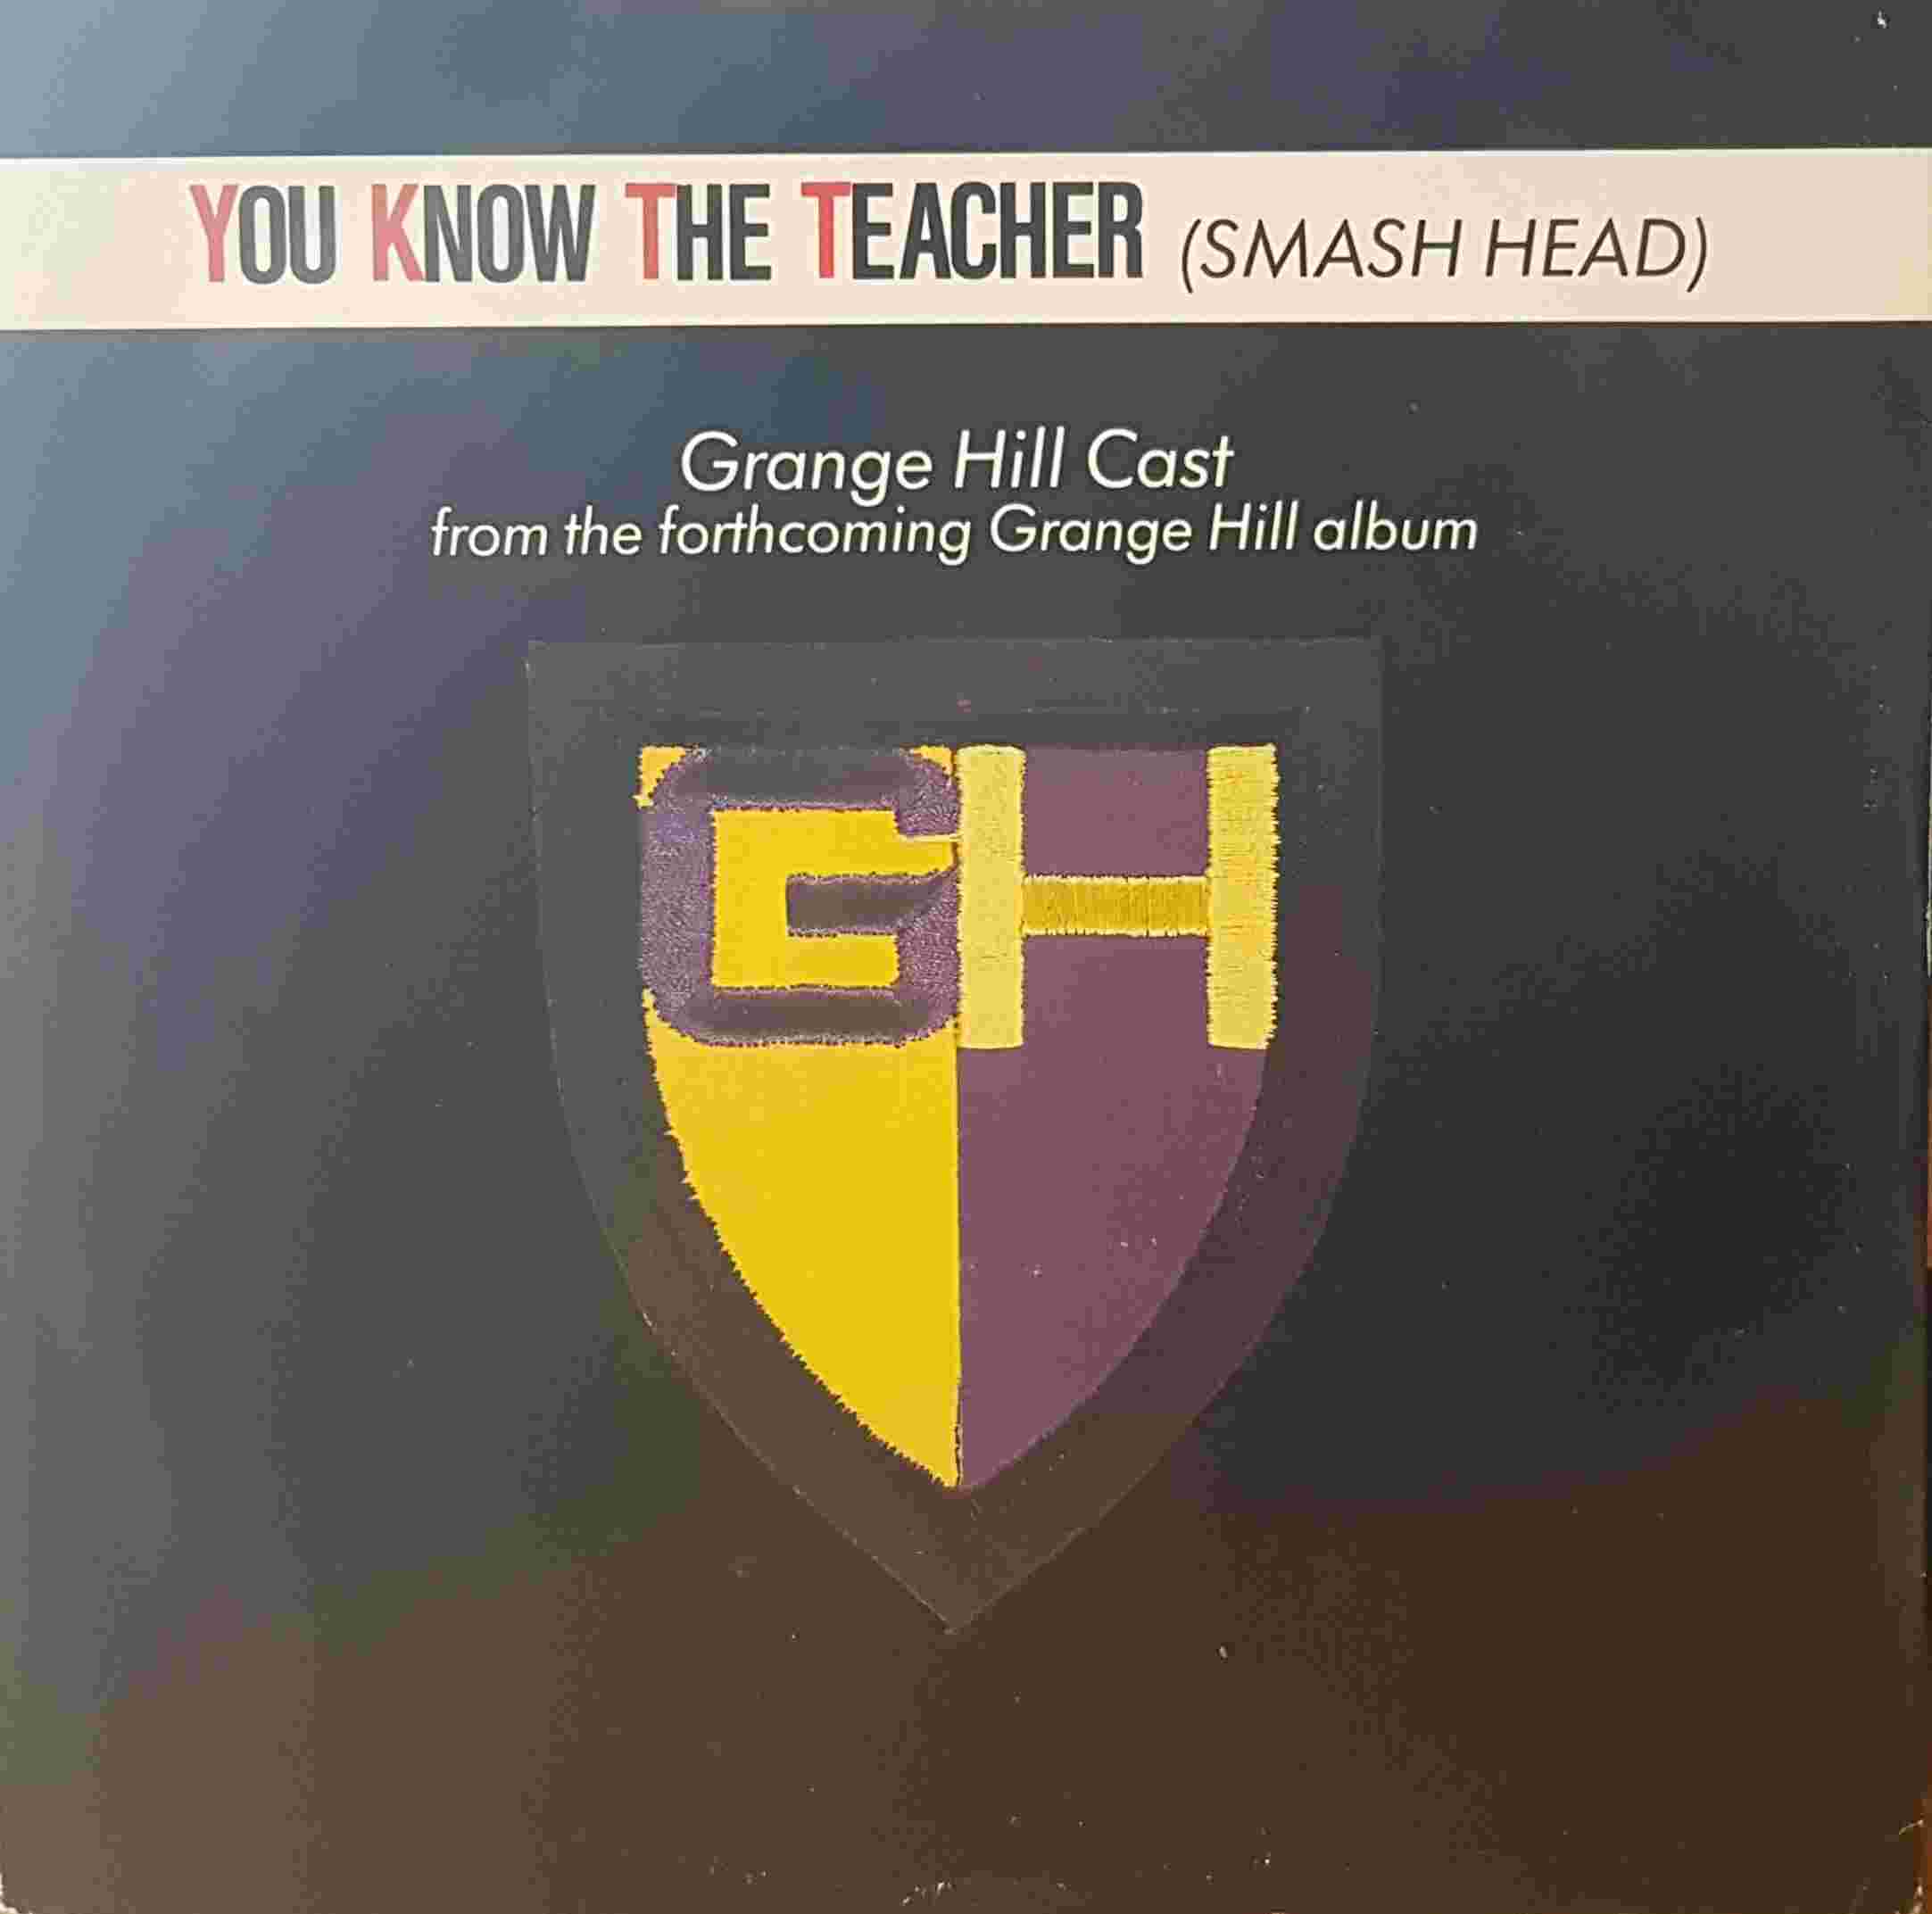 Picture of 12 RSL 205 You know the teacher by artist Grange Hill cast from the BBC 12inches - Records and Tapes library